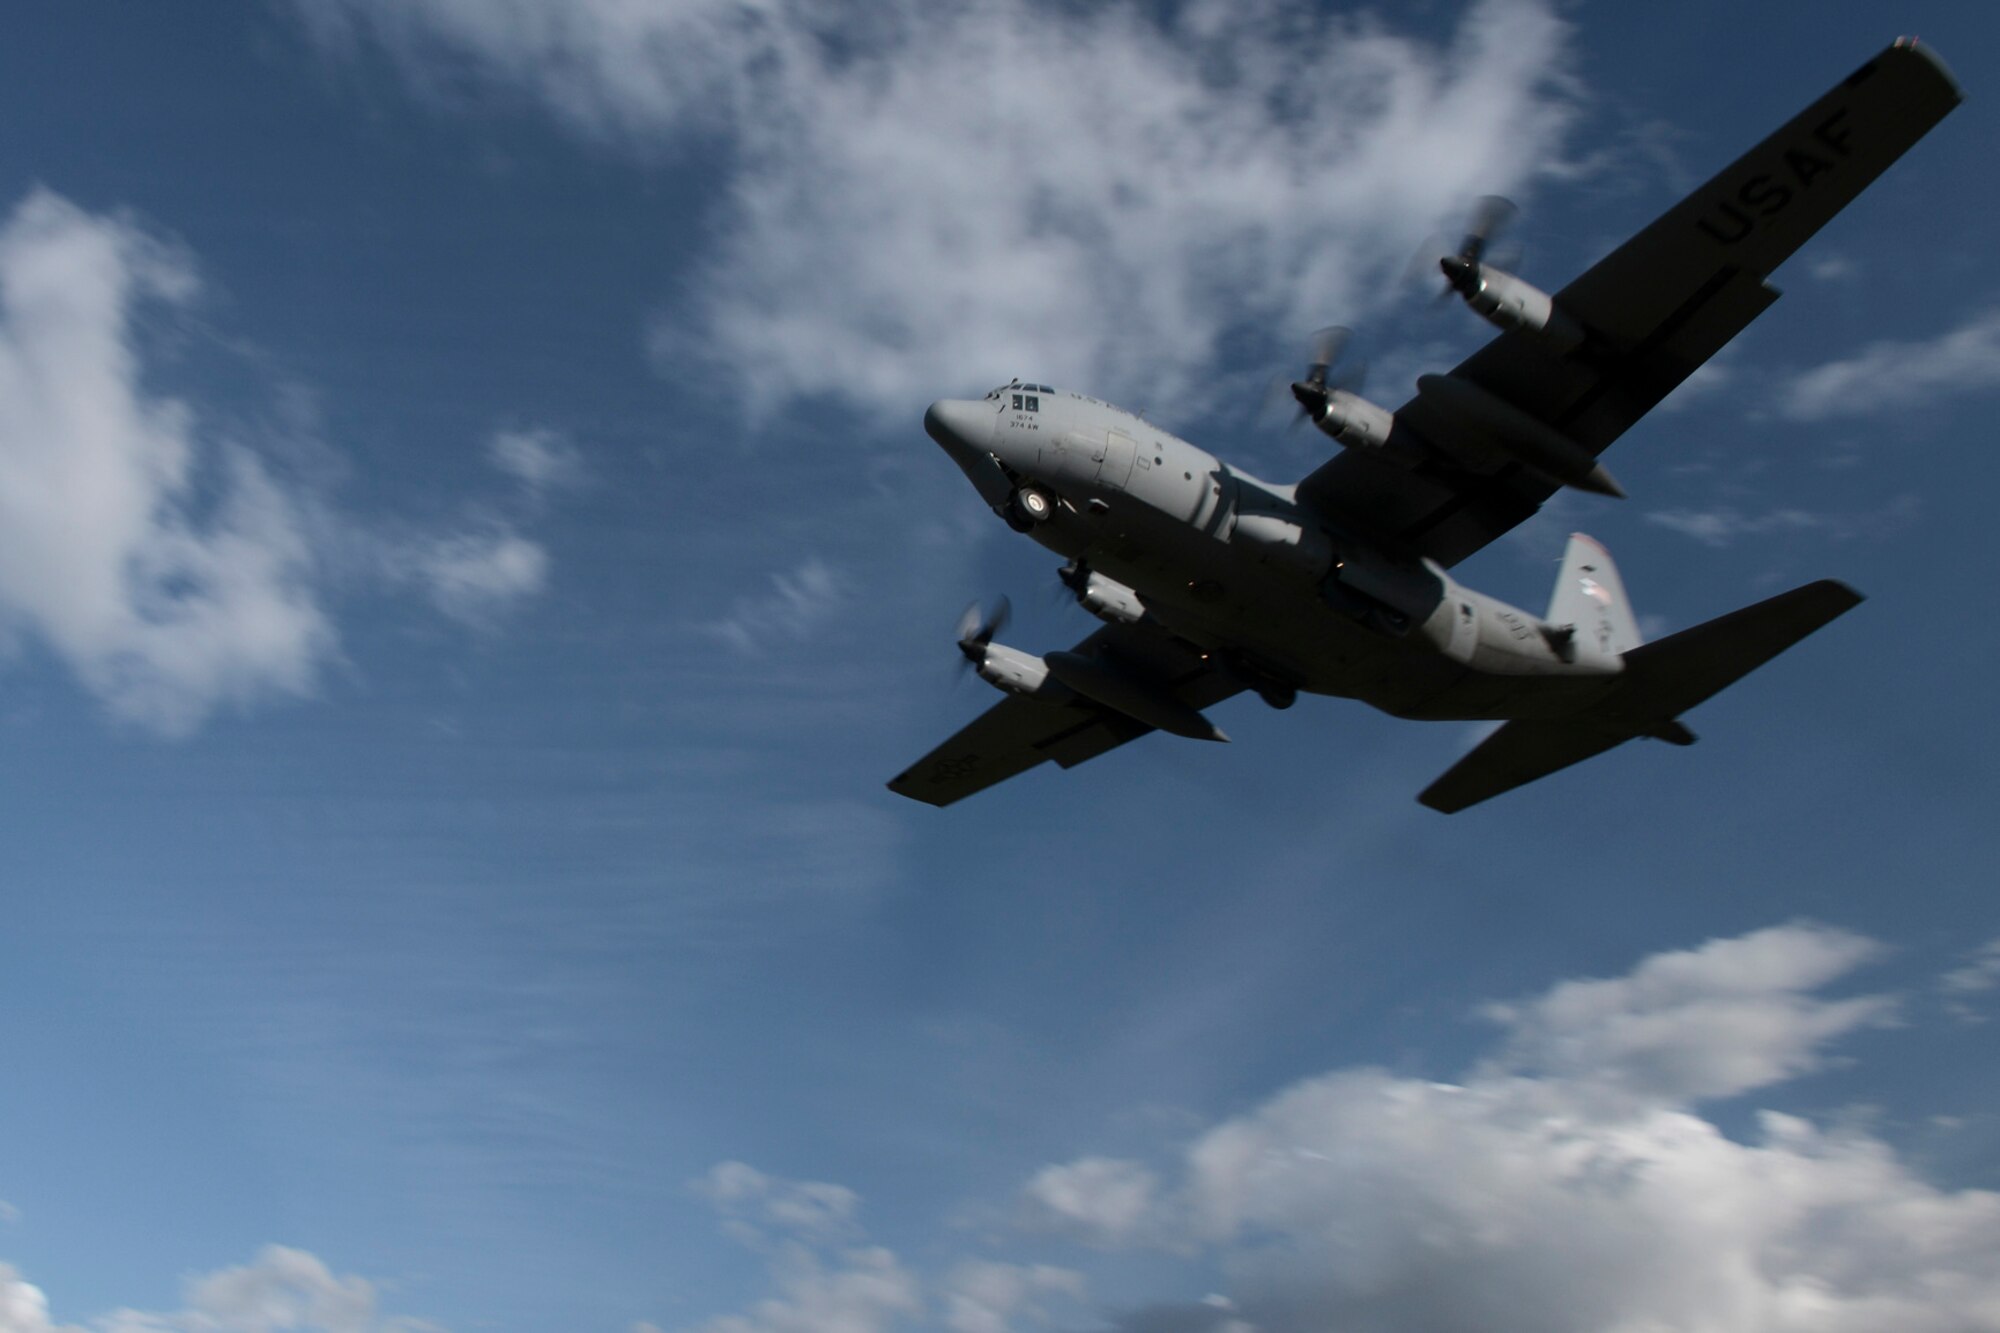 A U.S. Air Force C-130 Hercules with the 36th Airlift Squadron from Yokota Air Base, Japan, takes off of an austere runway used for training during RED FLAG-Alaska at Joint Base Elmendorf-Richardson, Alaska, Aug. 14, 2015. The training allowed C-130 aircrew to practice austere landings and take offs, combat offloads and supply drops, but also allowed friendly competition between participating Air Forces: U.S. Air Force, Japan Air Self-Defense Force, Royal Air Force, Royal Australian Air Force, Royal New Zealand Air Force and Royal Thai Air Force. Seasoned C-130 aircrew from each country judged the training exercises from the ground, allotting points based off predetermined timing and accuracy requirements. (U.S. Air Force photo by Staff Sgt. Cody H. Ramirez/Released)